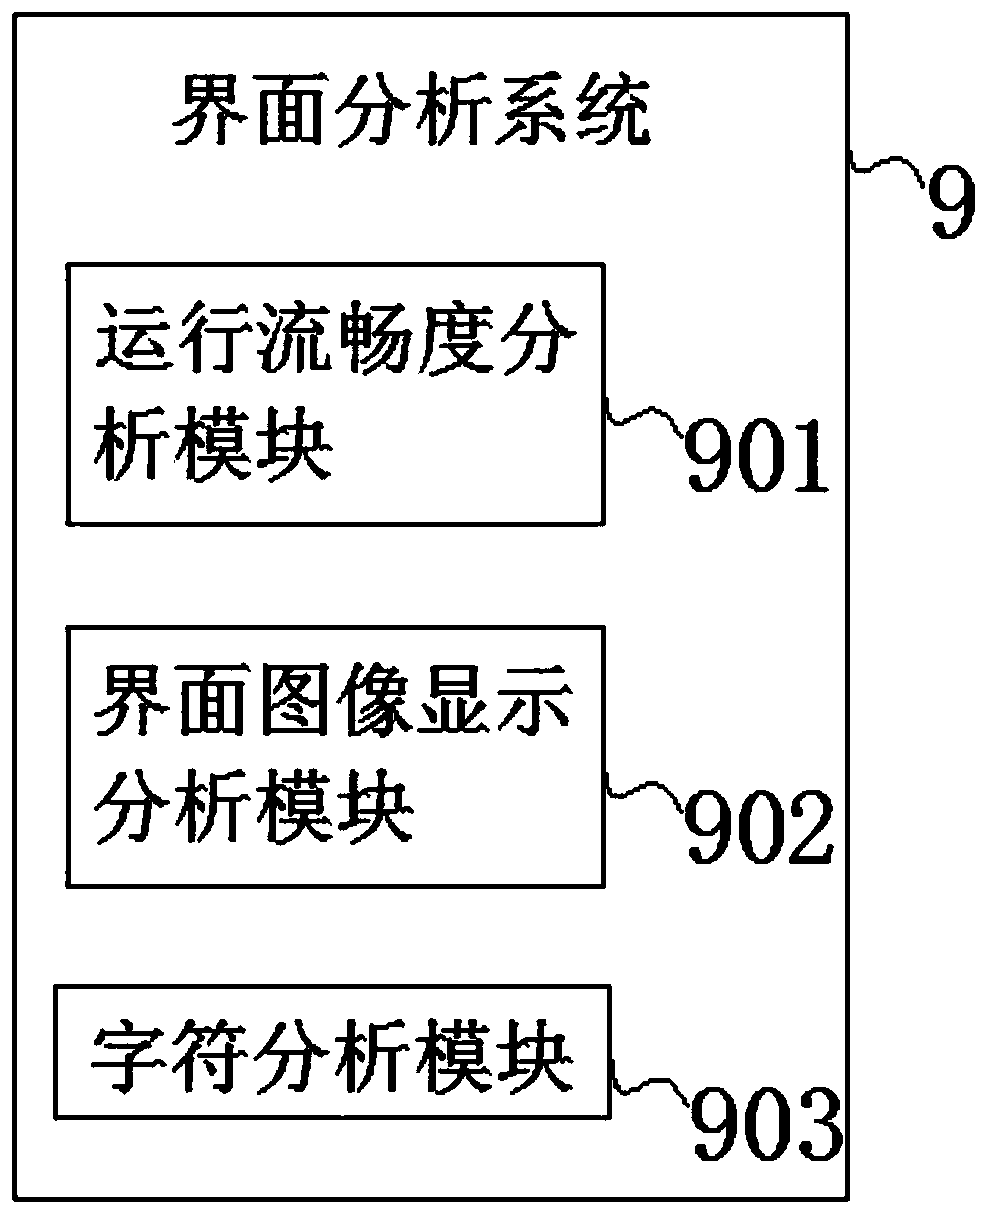 Computer application software testing system and method